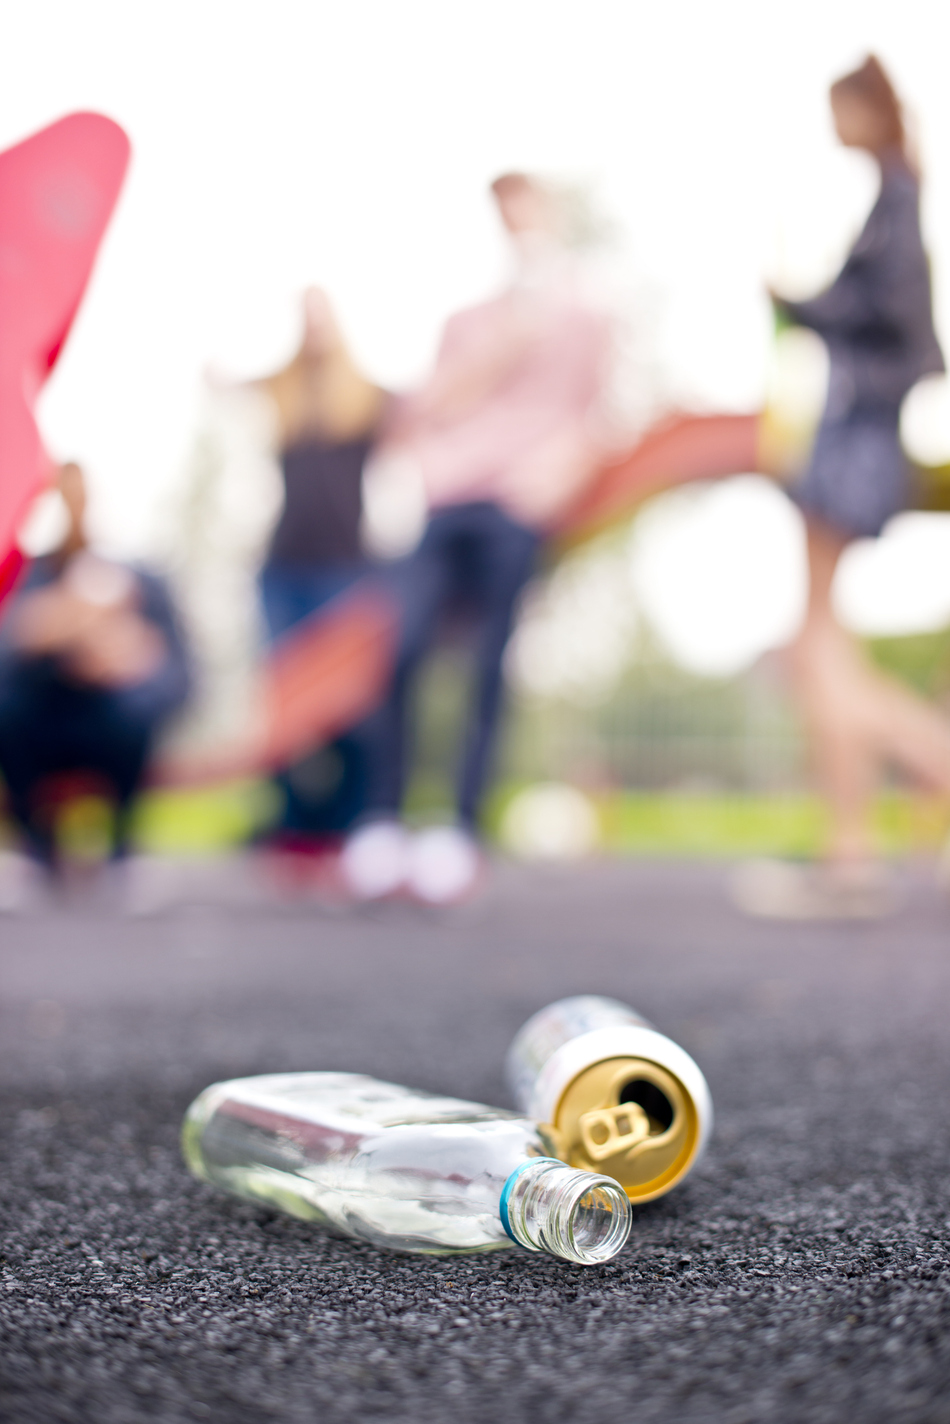 Adverse Effects of Alcohol on Teens’ Brains